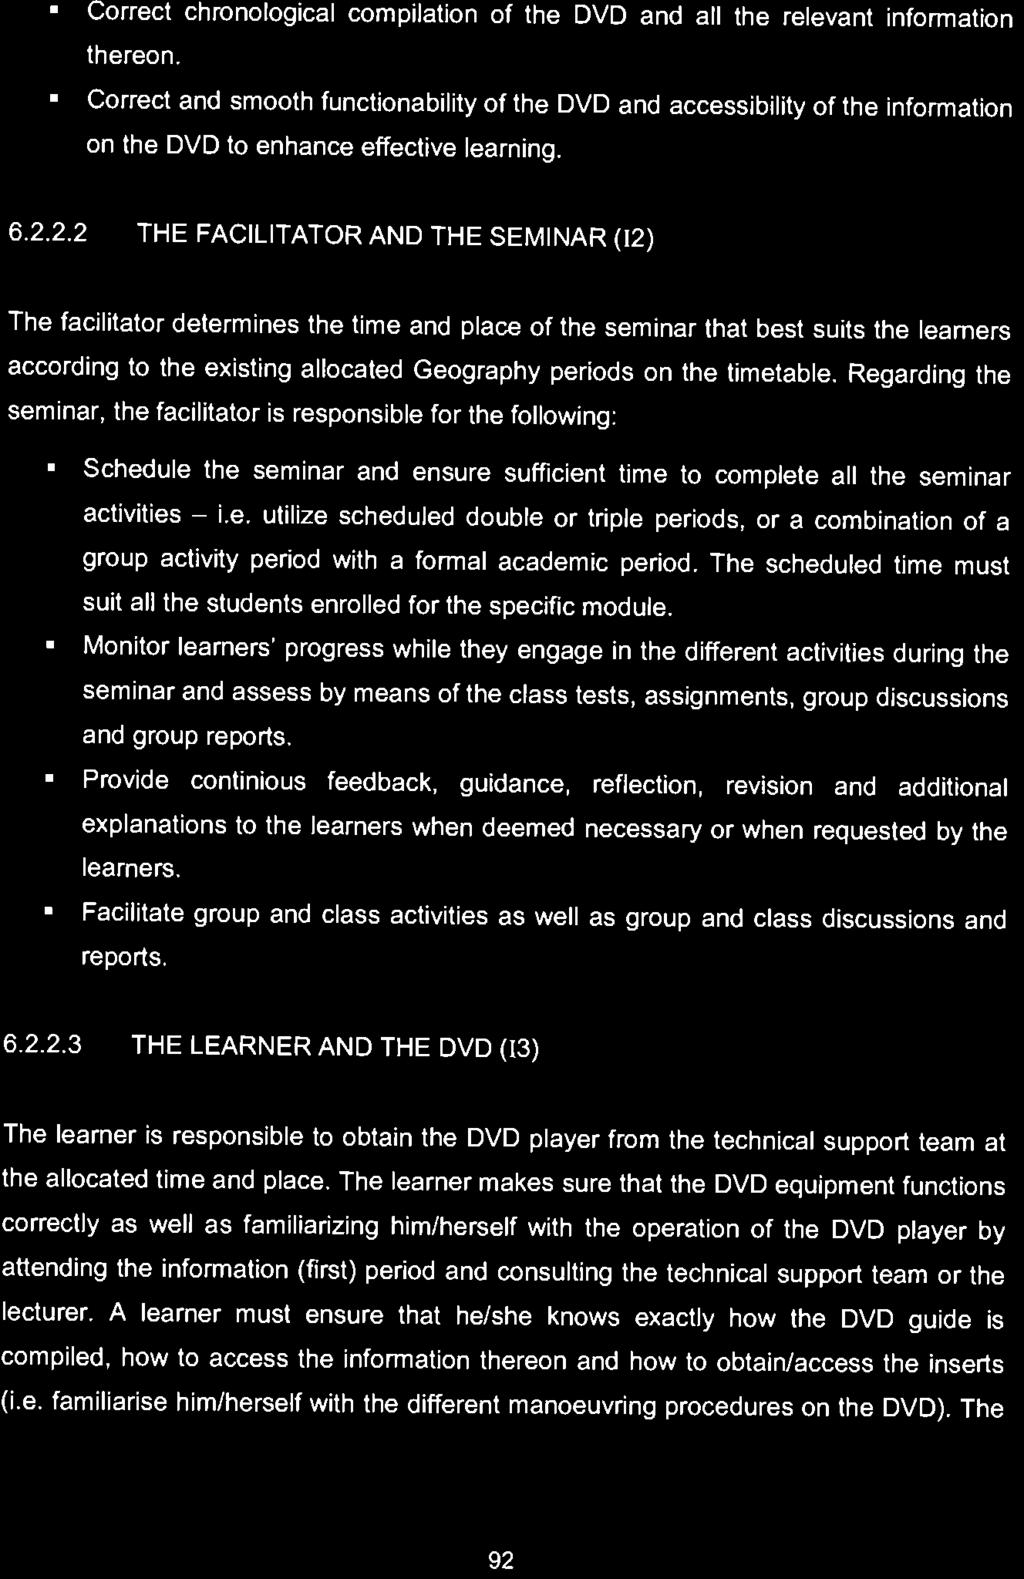 2.2 THE FACILITATOR AND THE SEMINAR (12) The facilitator determines the tlme and place of the seminar that best suits the learners according to the existing allocated Geography periods on the